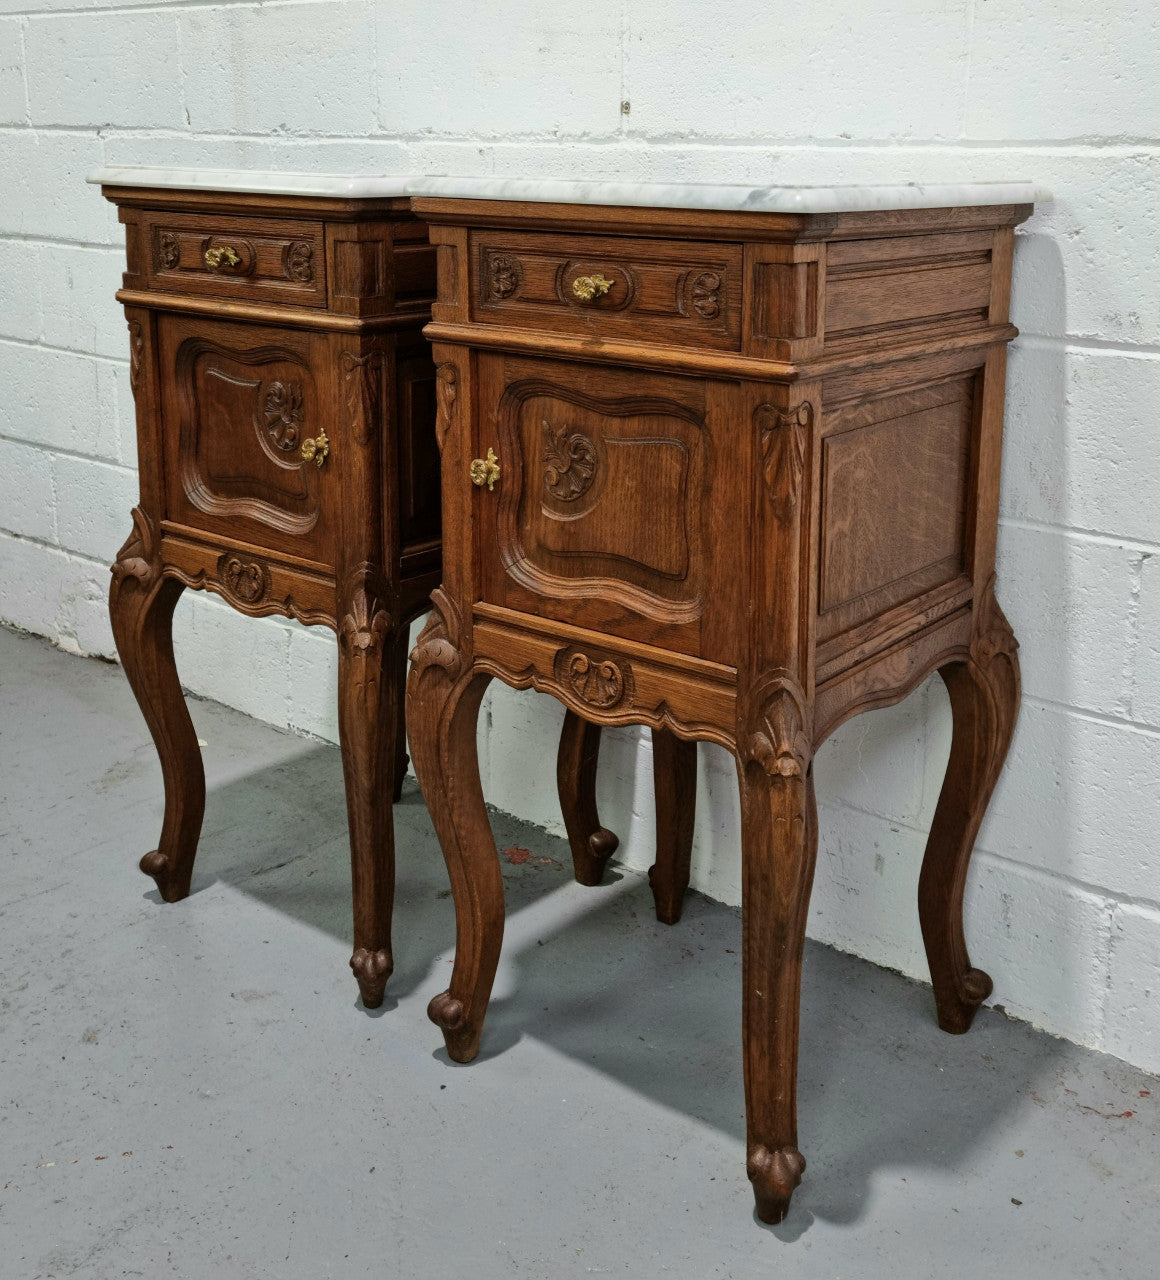 Beautiful pair of French Oak carved Louis XV style bedside cabinets with a white marble top, drawer and cupboard. They are in good original detailed condition.